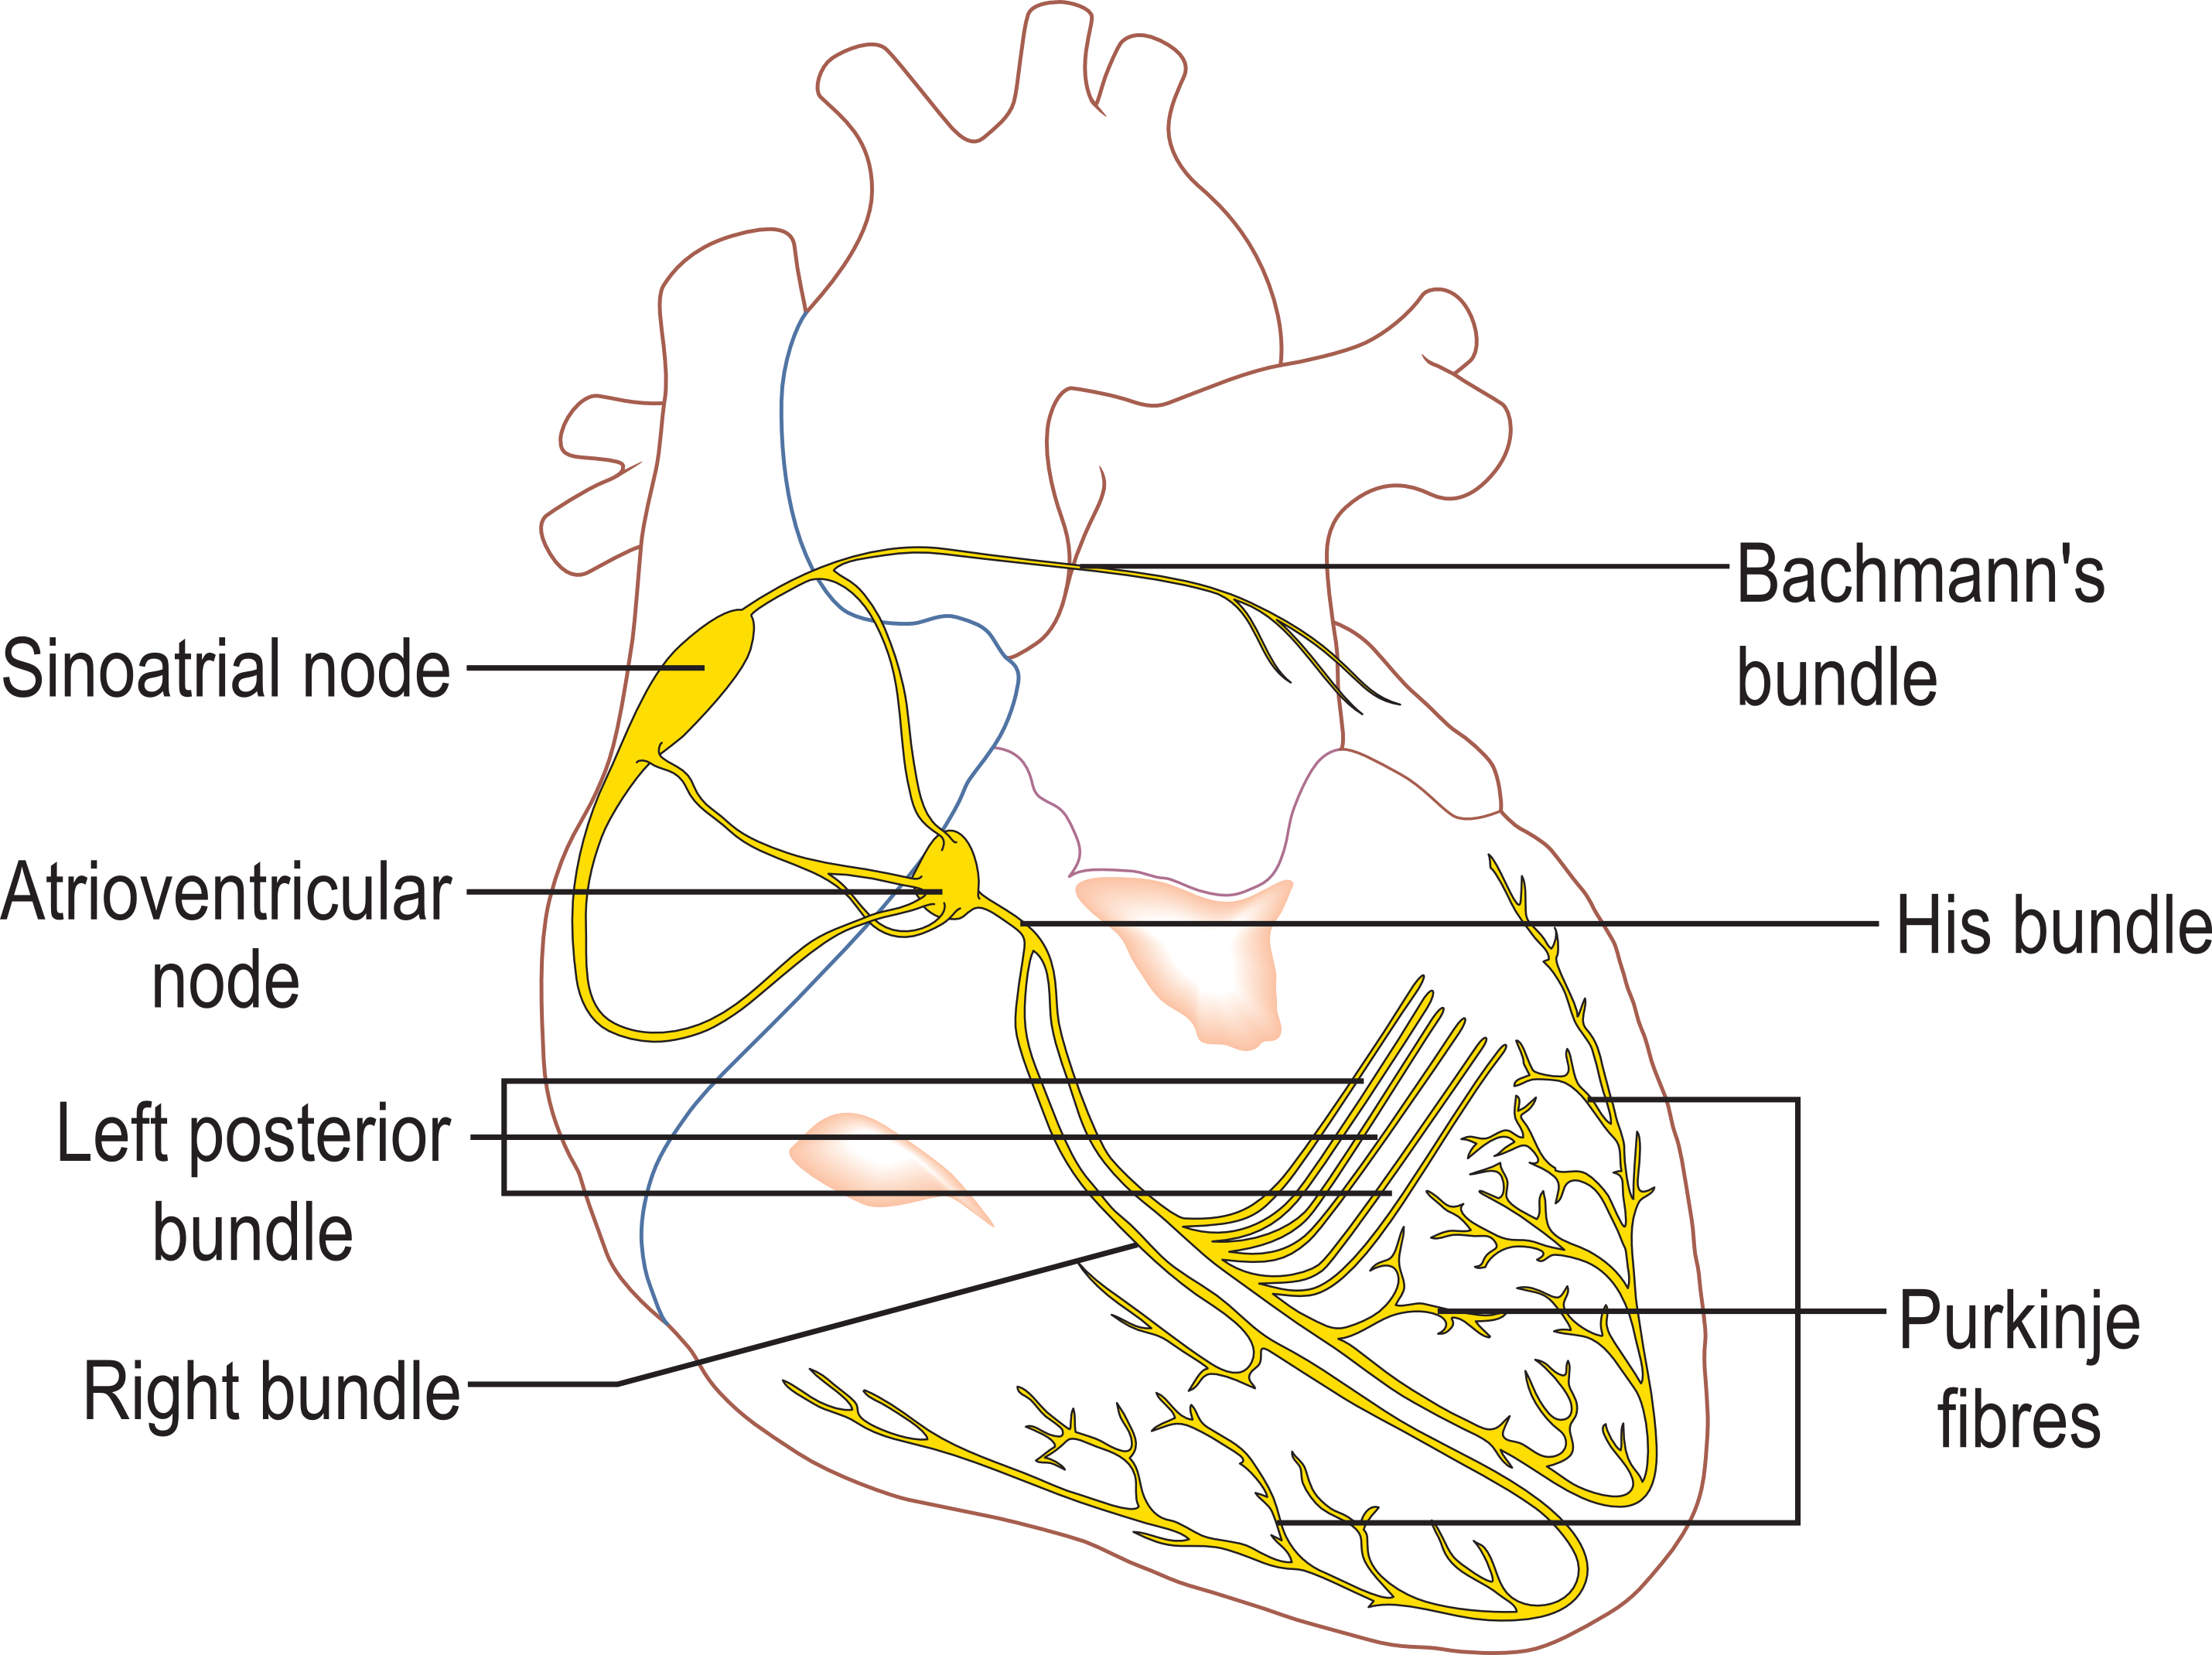 Figure 1: The conduction system of the human heart. The sinoatrial (or sinus) node, natural pacemaker of the heart, initiates a wave of action potentials that propagate sequentially and preferentially through specialised conductive structures (yellow) to reach every part of the heart muscle. (illustration by Madhero88, from Wikimedia commons, CC-By license)